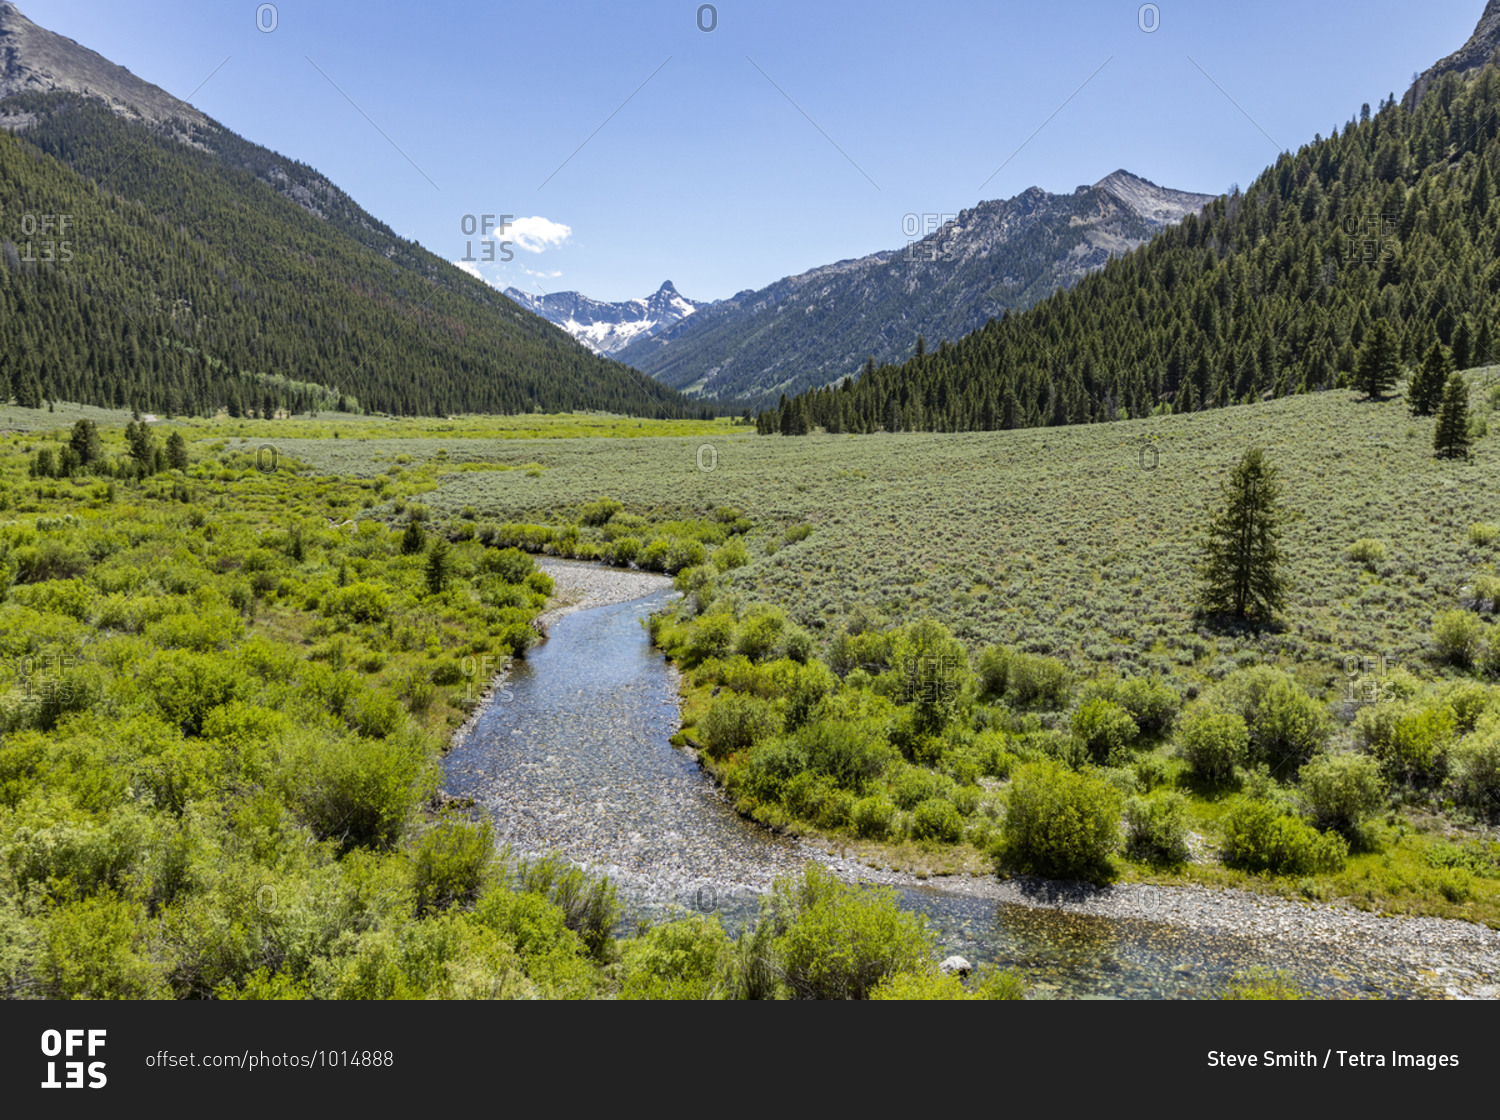 USA, Idaho, Sun Valley, Landscape with river and mountains